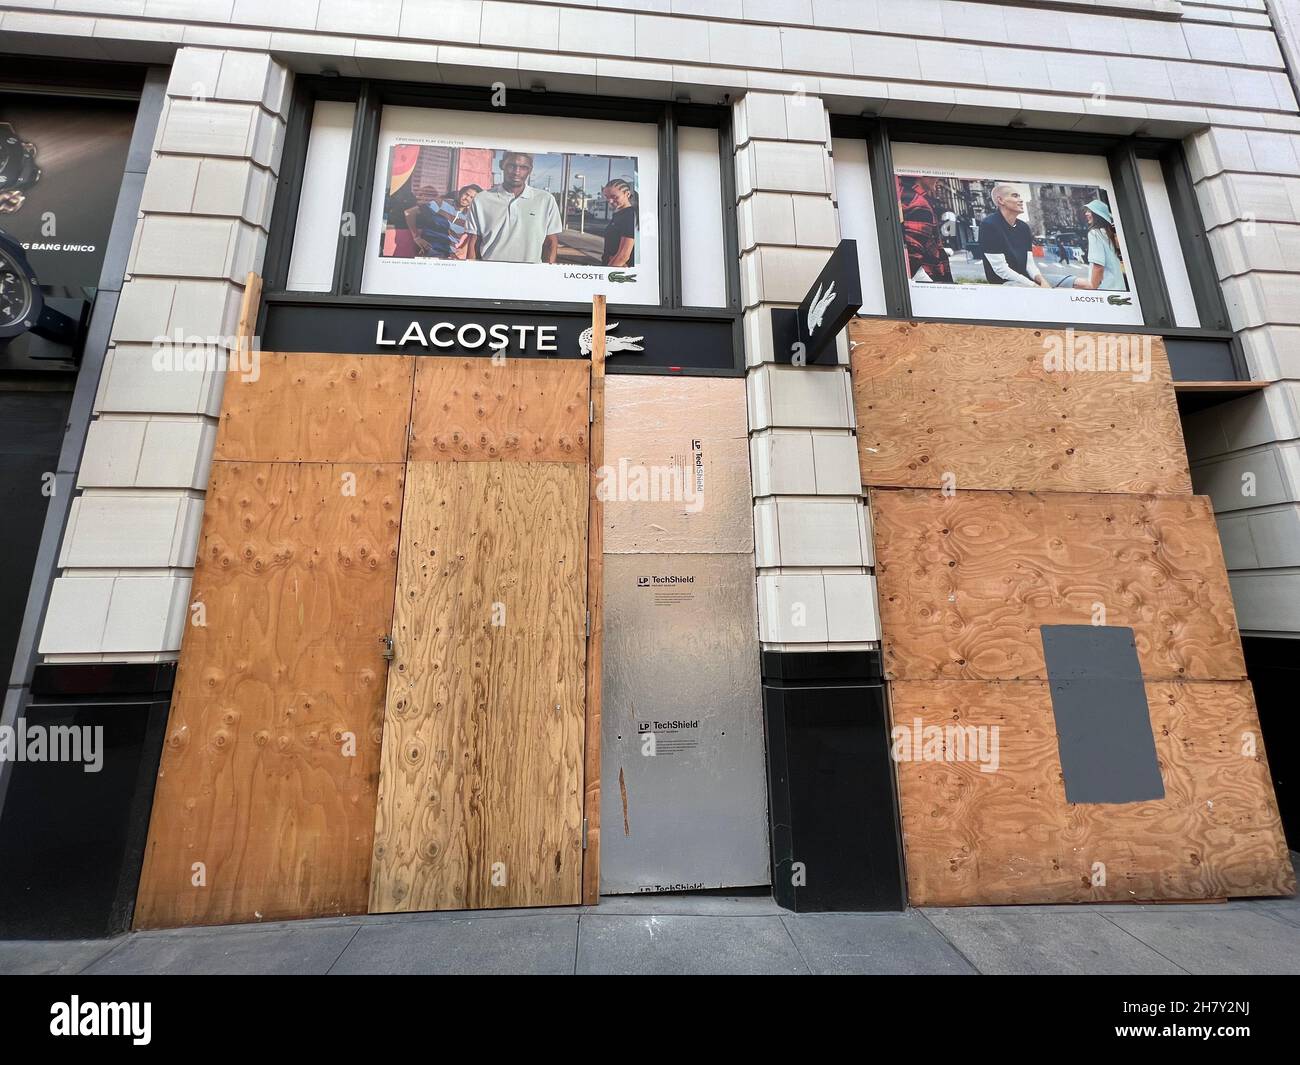 San Francisco, United States. 25th Nov, 2021. The windows the Lacoste store in Union Square in San Francisco, California remain boarded up on Nov. 25, 2021. on social media showed